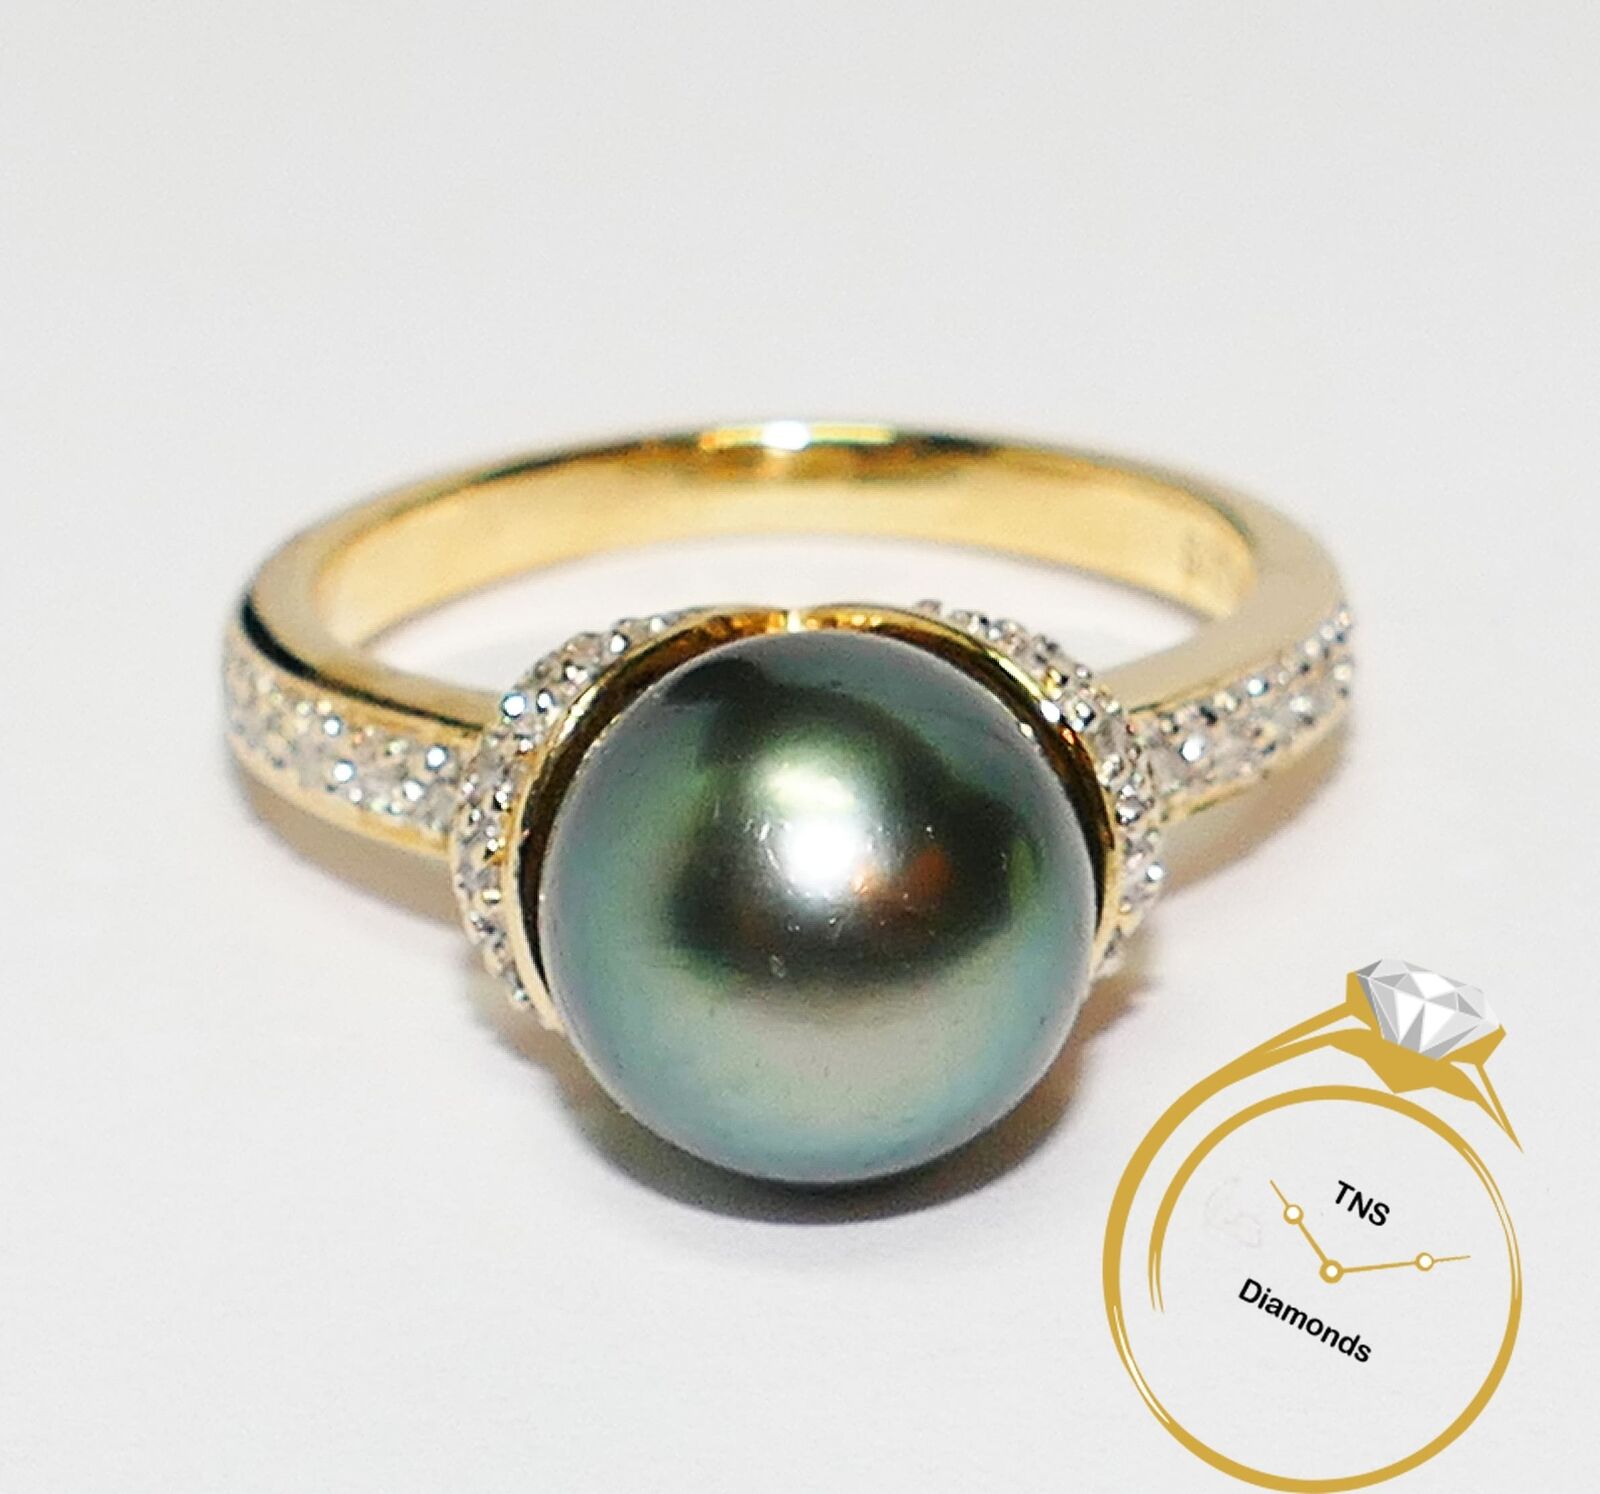 85mm-South-Sea-Pearl-Ring-024ct-FVS-14k-Yellow-Gold-Size-475-113691003654-1